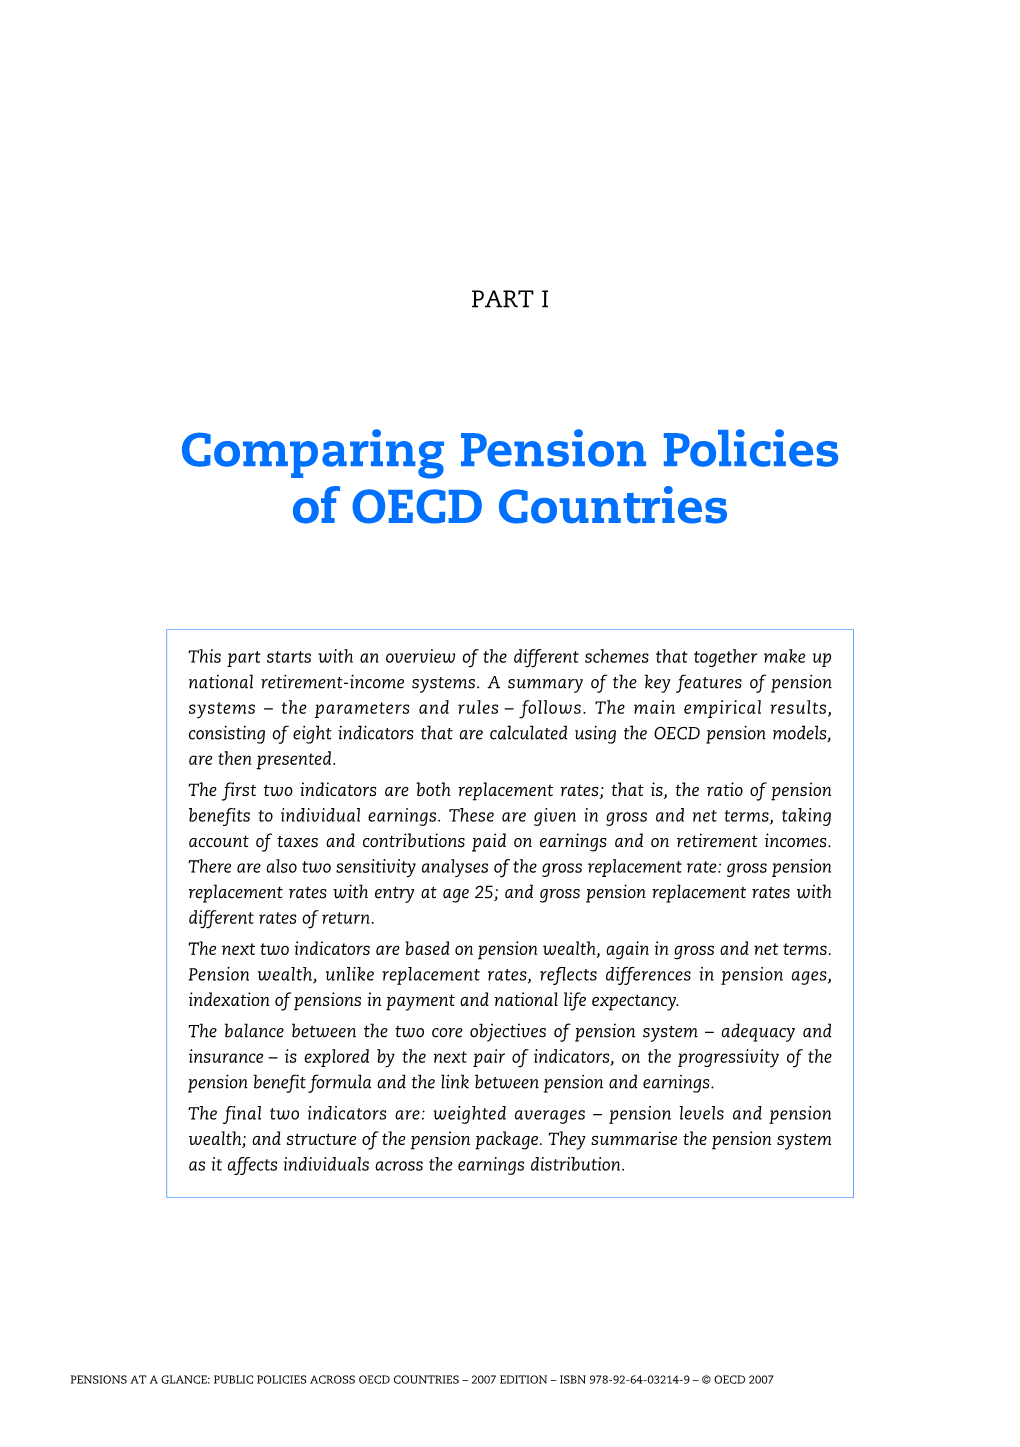 Comparing Pension Policies of OECD Countries